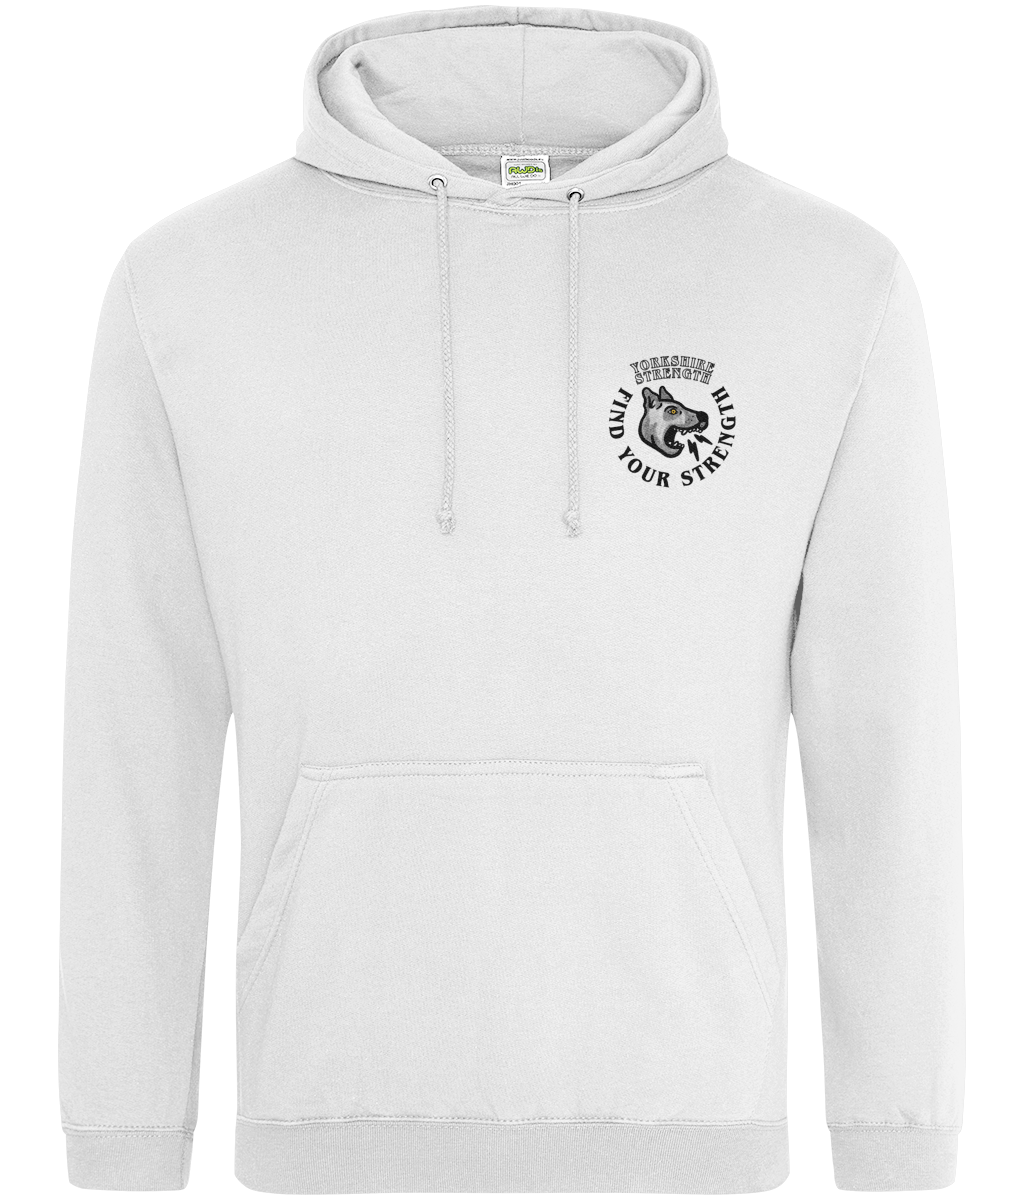 Find your strength hoodie - Yorkshire Strength